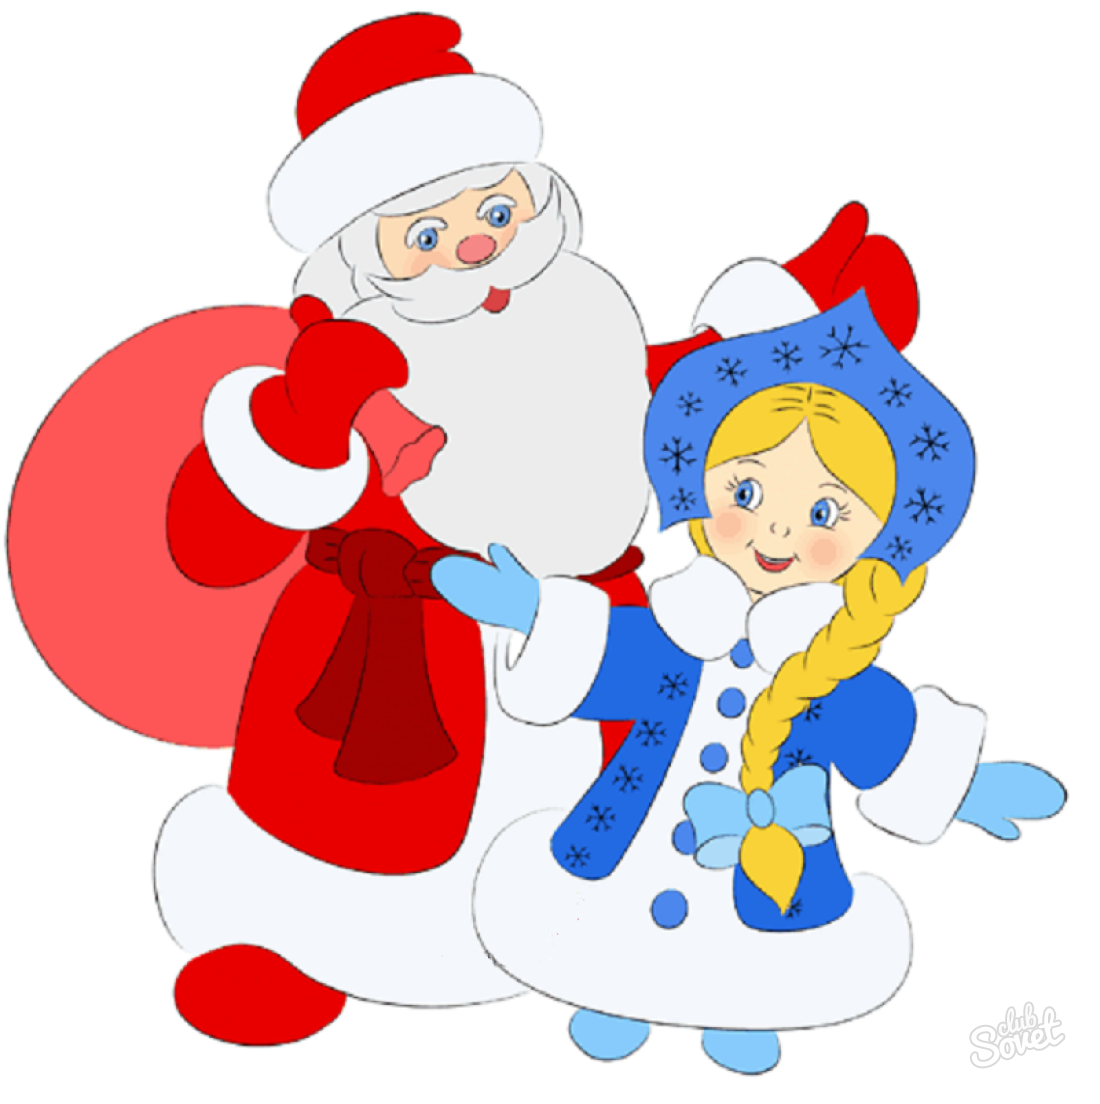 How to draw Santa Claus and Snow Maiden